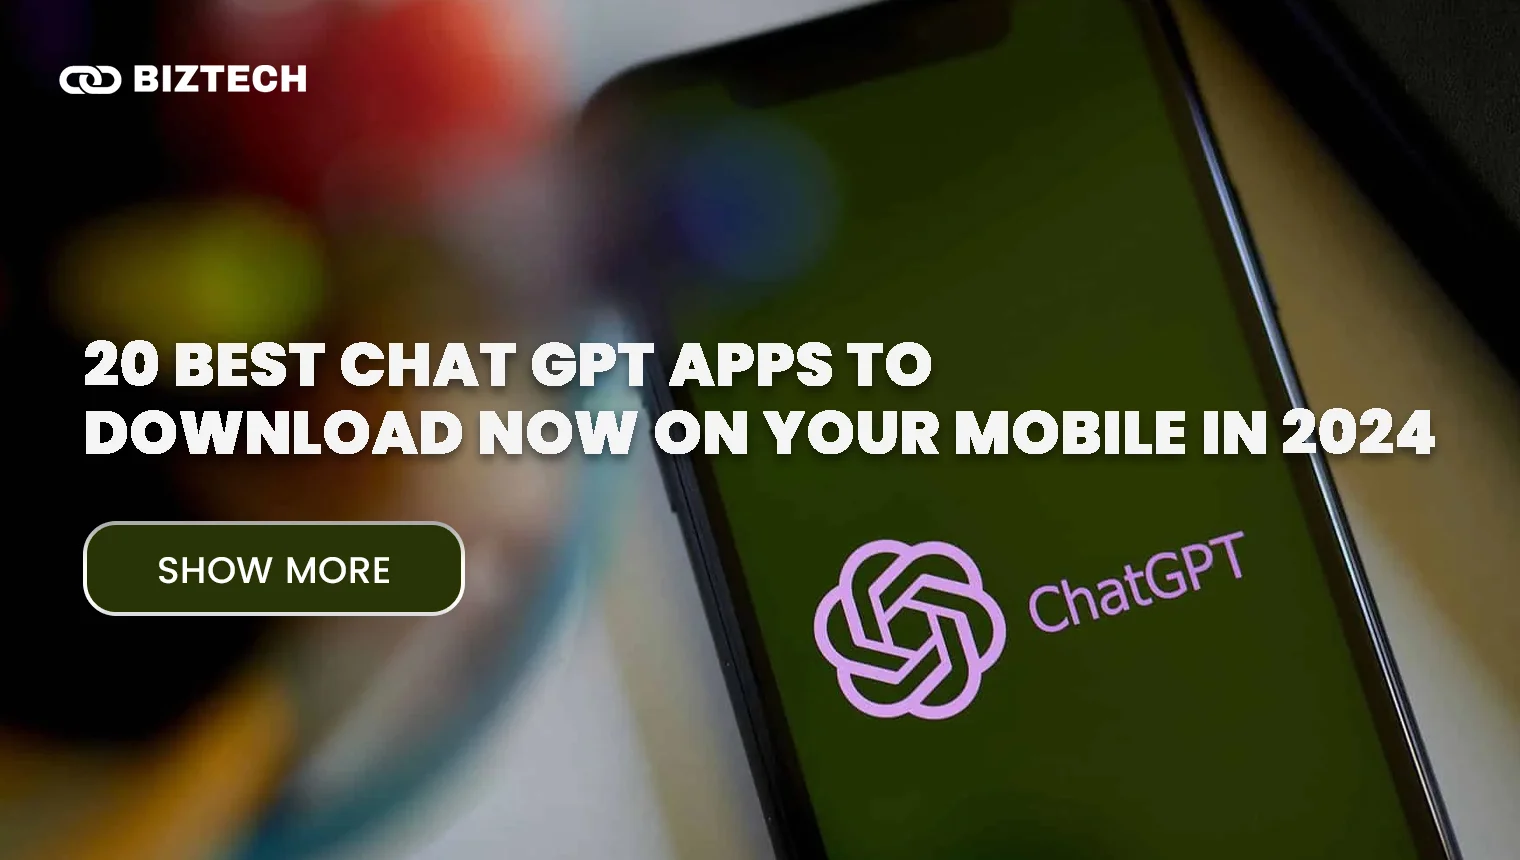 20 Best Chat GPT Apps To Download Now on Your Mobile in 2024